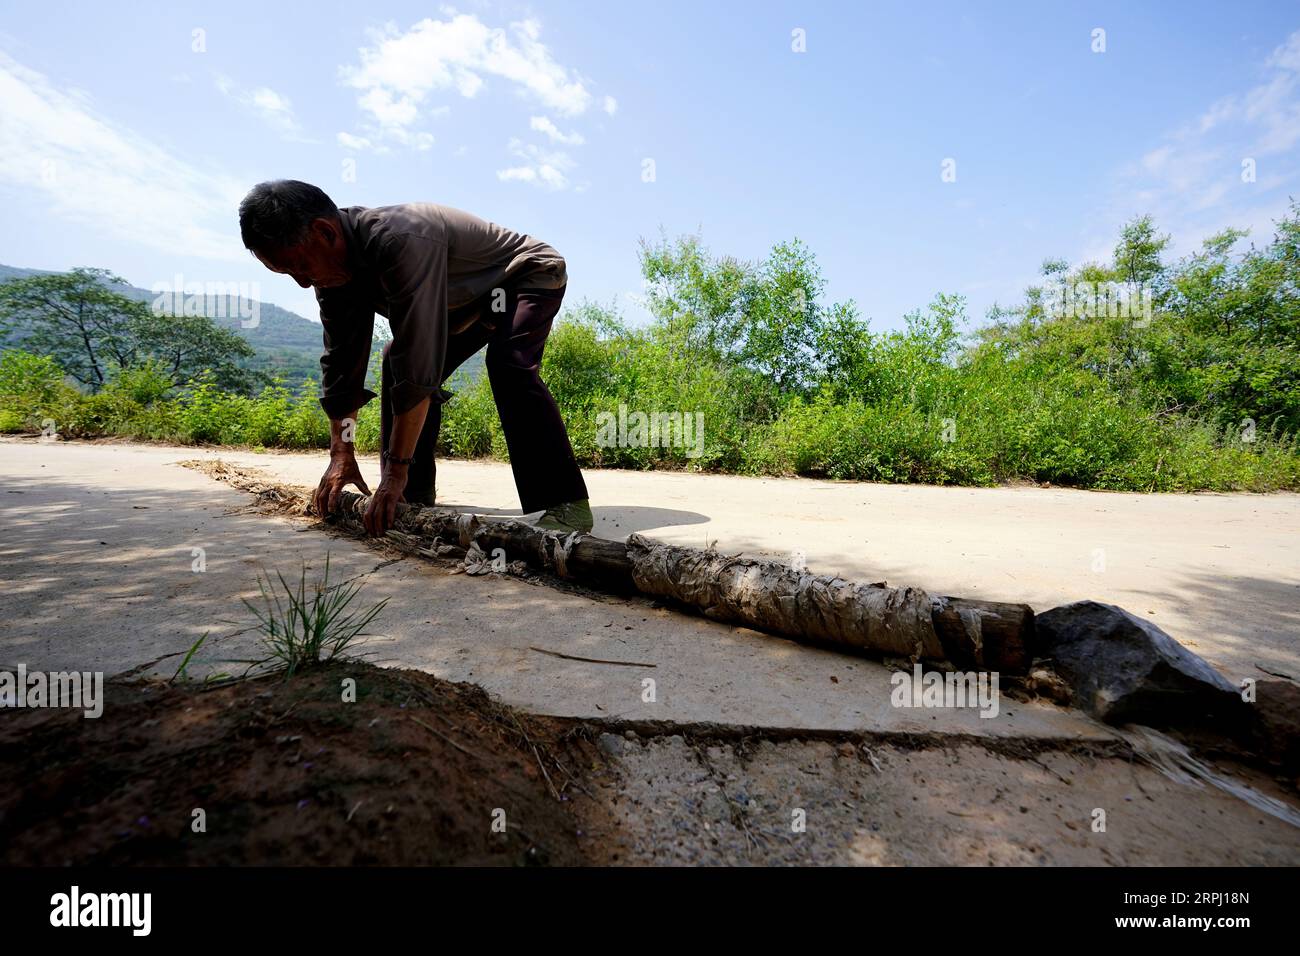 191122 -- YICHENG COUNTY, Nov. 22, 2019 -- A villager moves a log laid to help garner water at a rain water collection facility in Nanling Village of Yicheng County, north China s Shanxi Province, July 31, 2019. As the switch was pulled, water spurted out from 403 meters down under. Nanling Village s very first deep-water well went into service on an early winter morning. In the past, the village, spreading across the ravines of the Zhongtiao Mountains in northern China, had relied solely on mud pits to store its valuable drinking water for centuries. Haunted by the fear of drought, generation Stock Photo